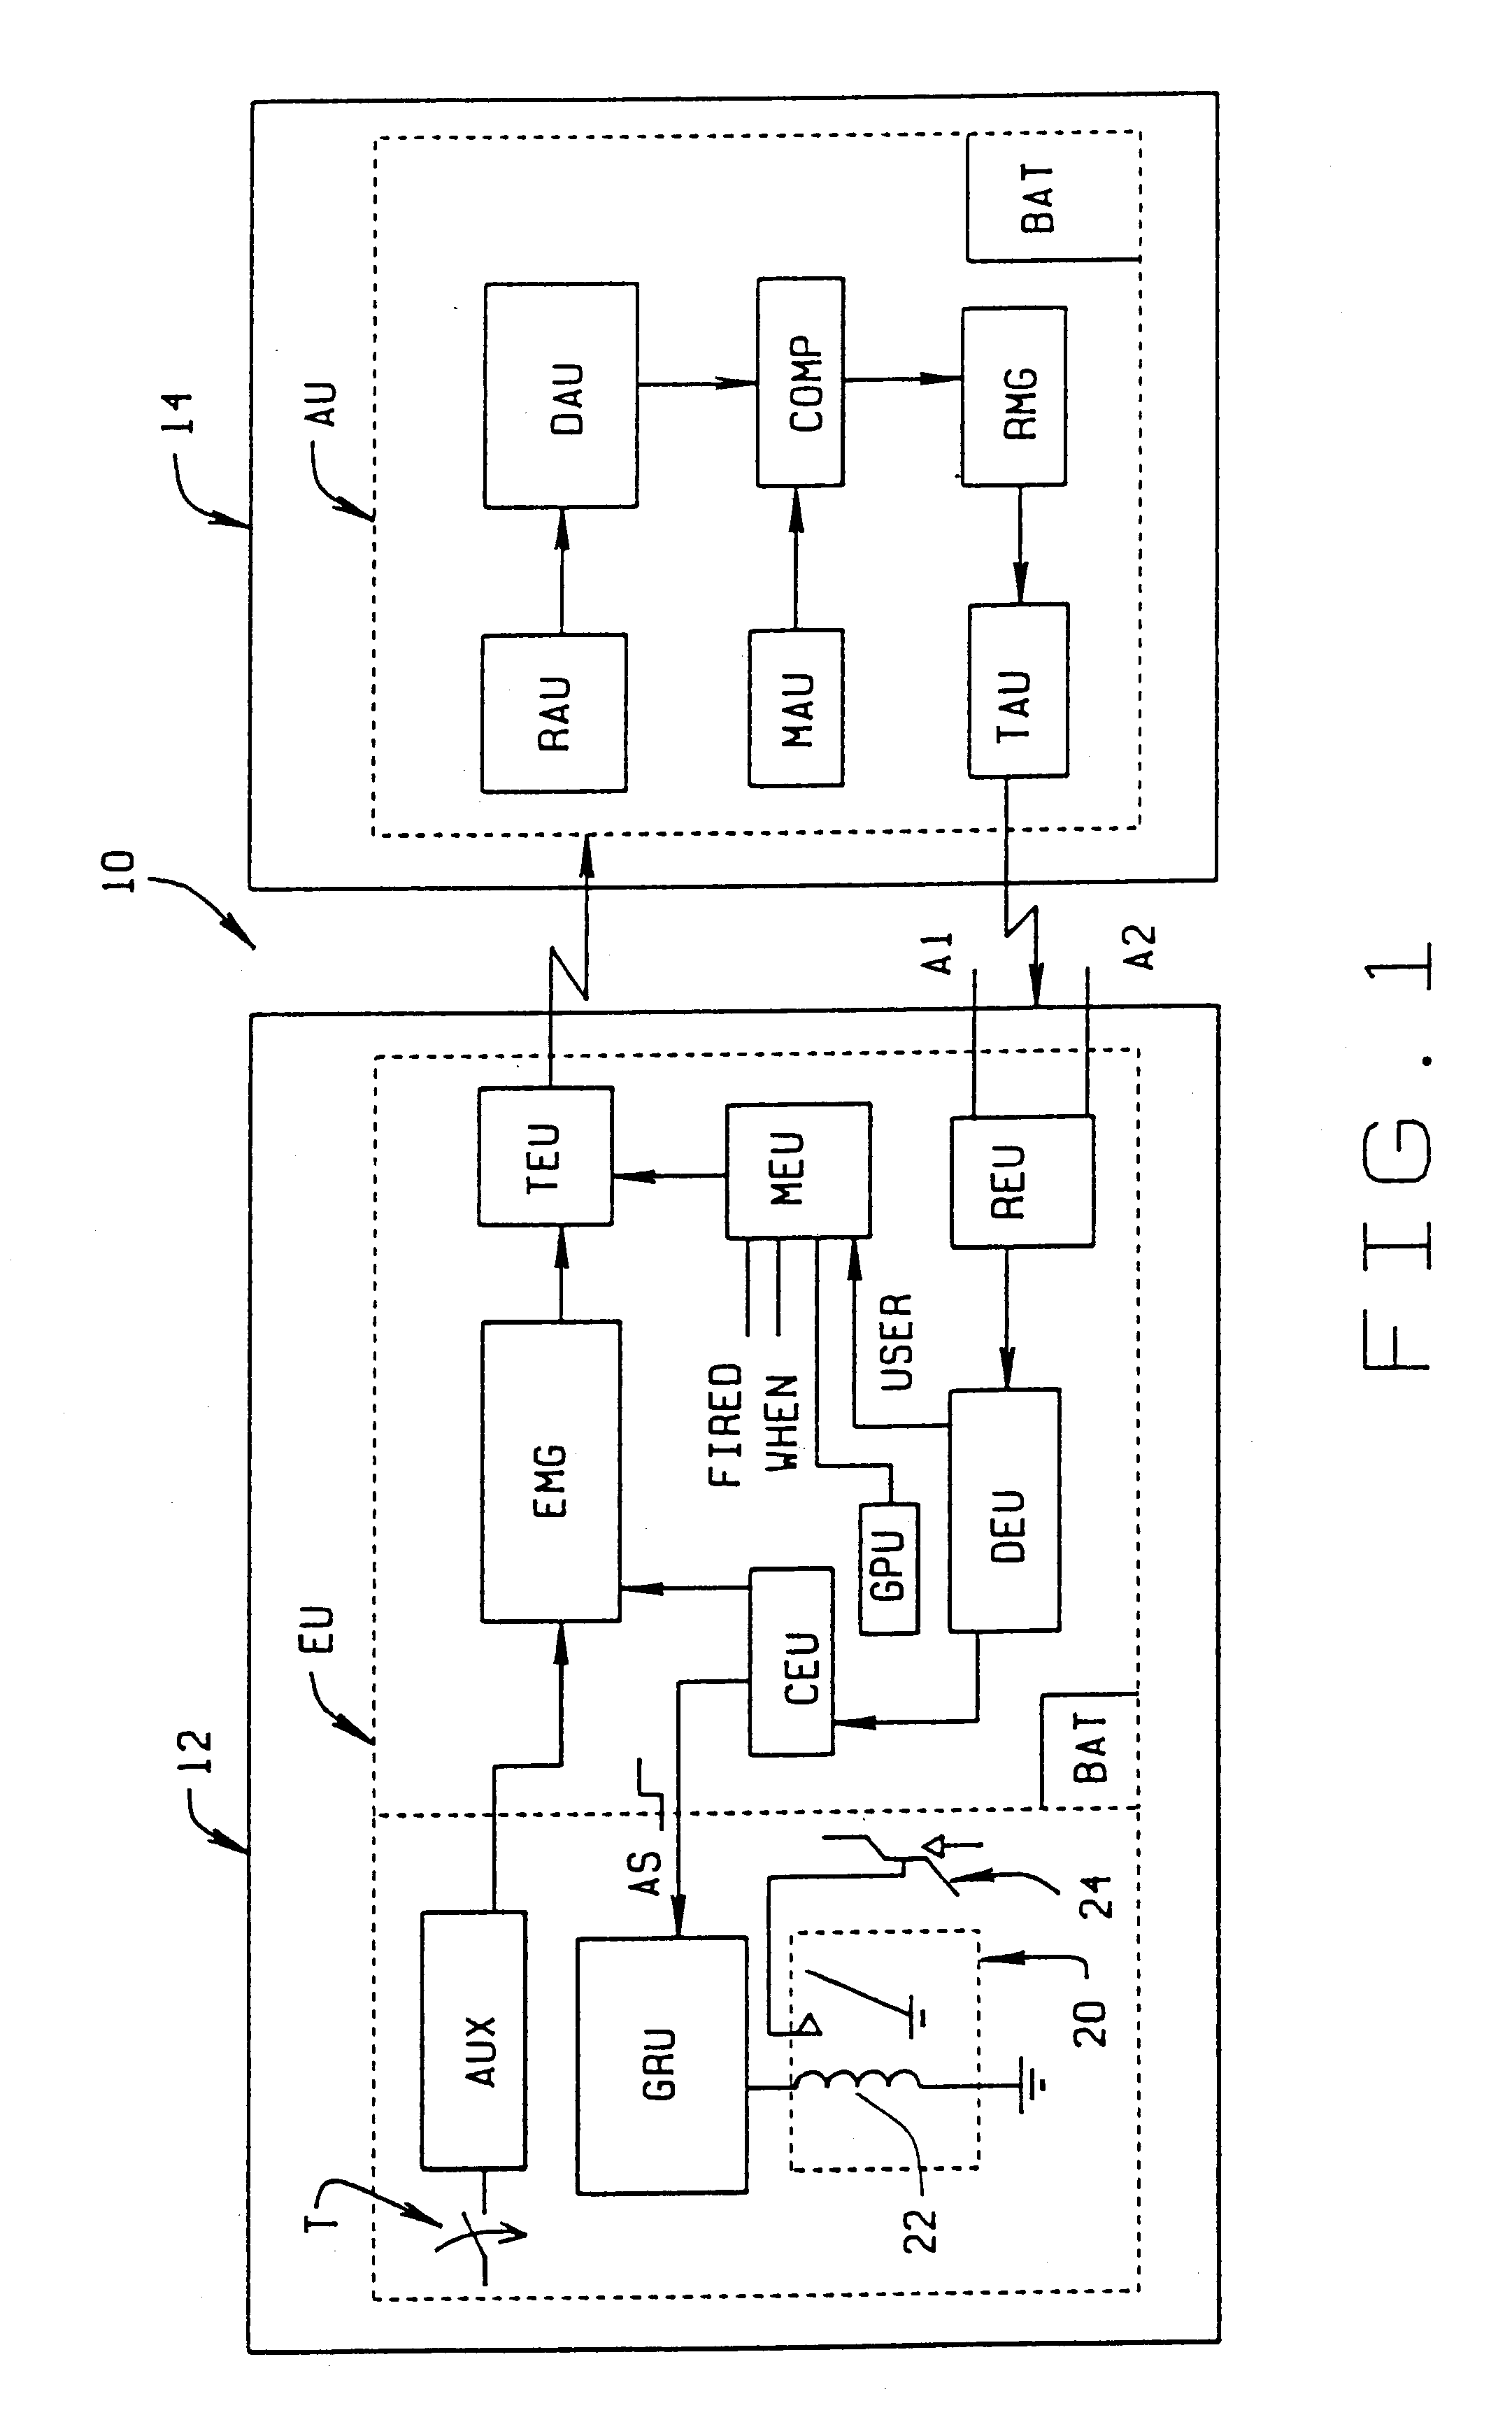 Apparatus and method for user control of appliances